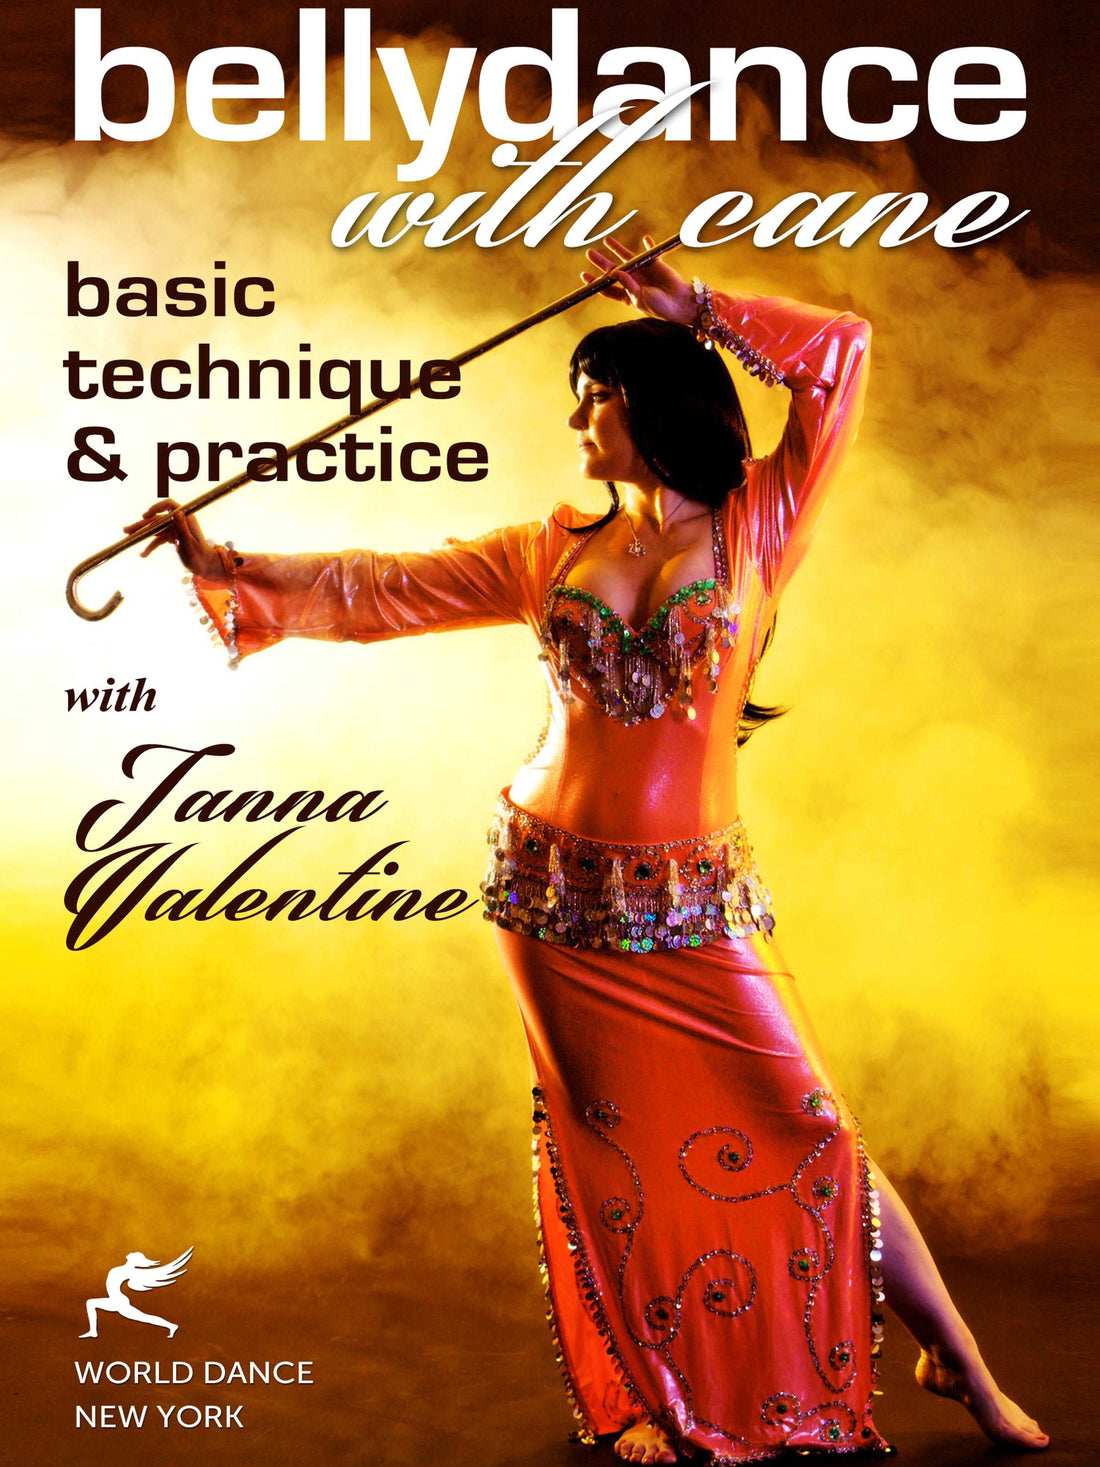 Belly Dance with Cane: Technique & Practice with Tanna Valentine - World Dance New York